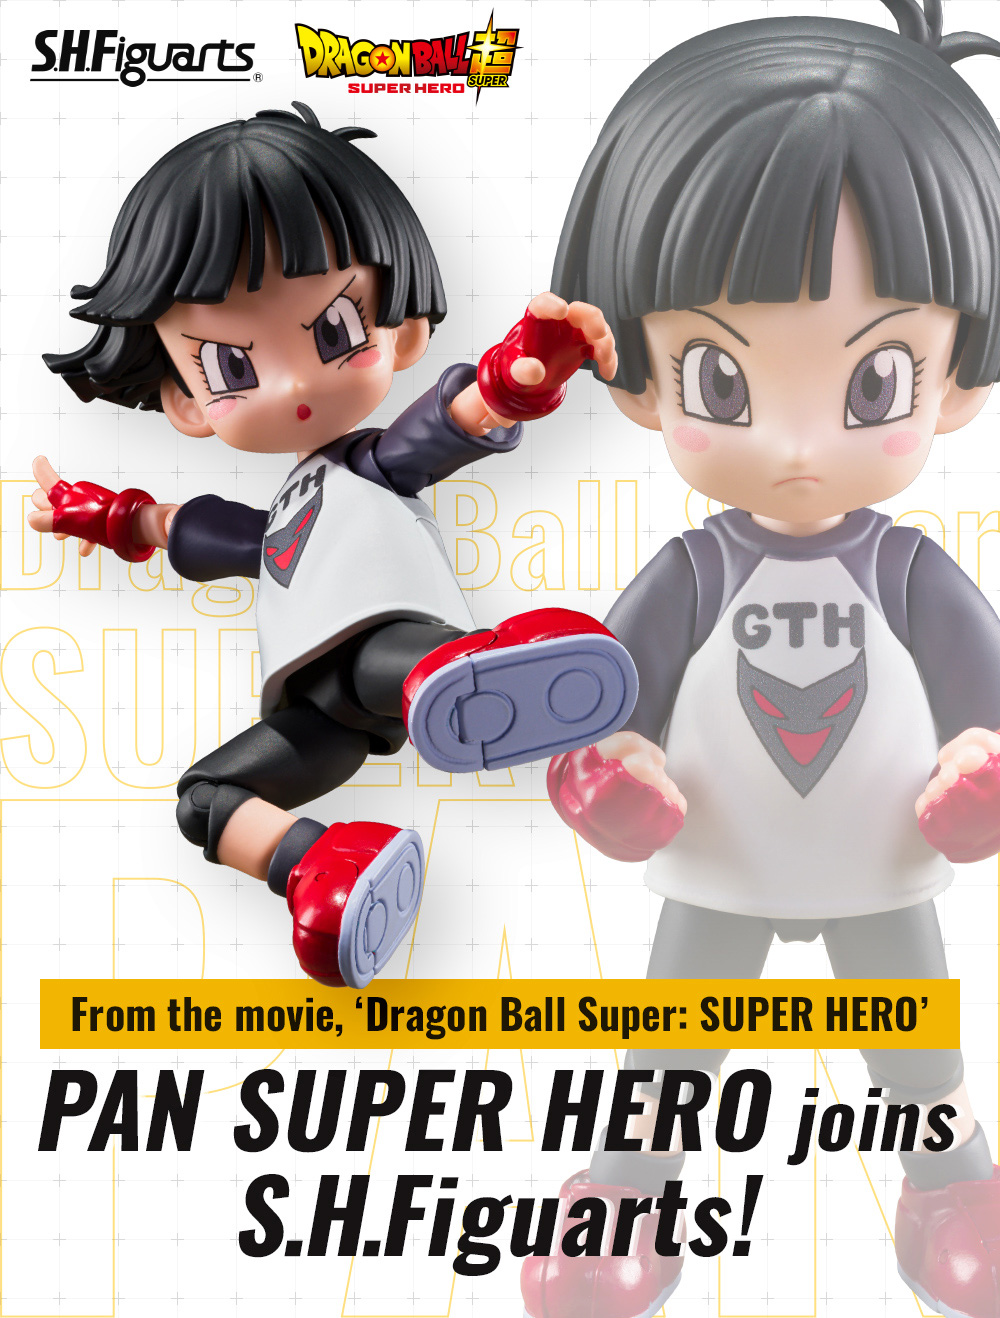 From the movie, ‘Dragon Ball Super: SUPER HERO’ PAN SUPER HERO joins S.H.Figuarts!